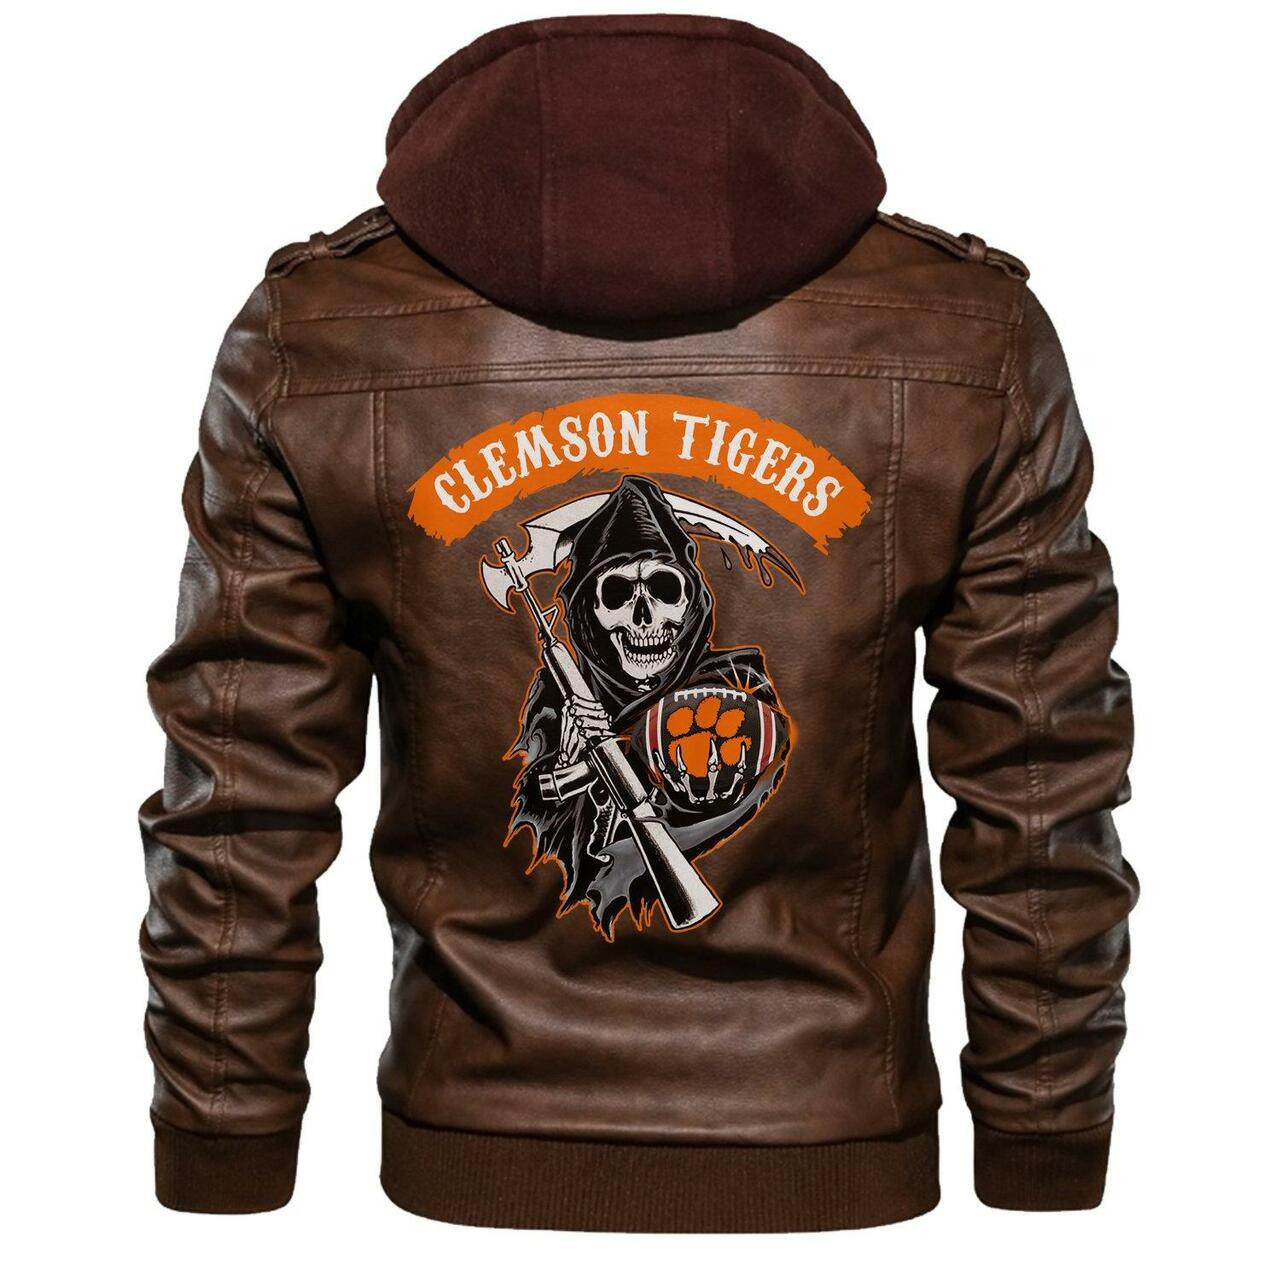 To get a great look, consider purchasing This New Leather Jacket 78